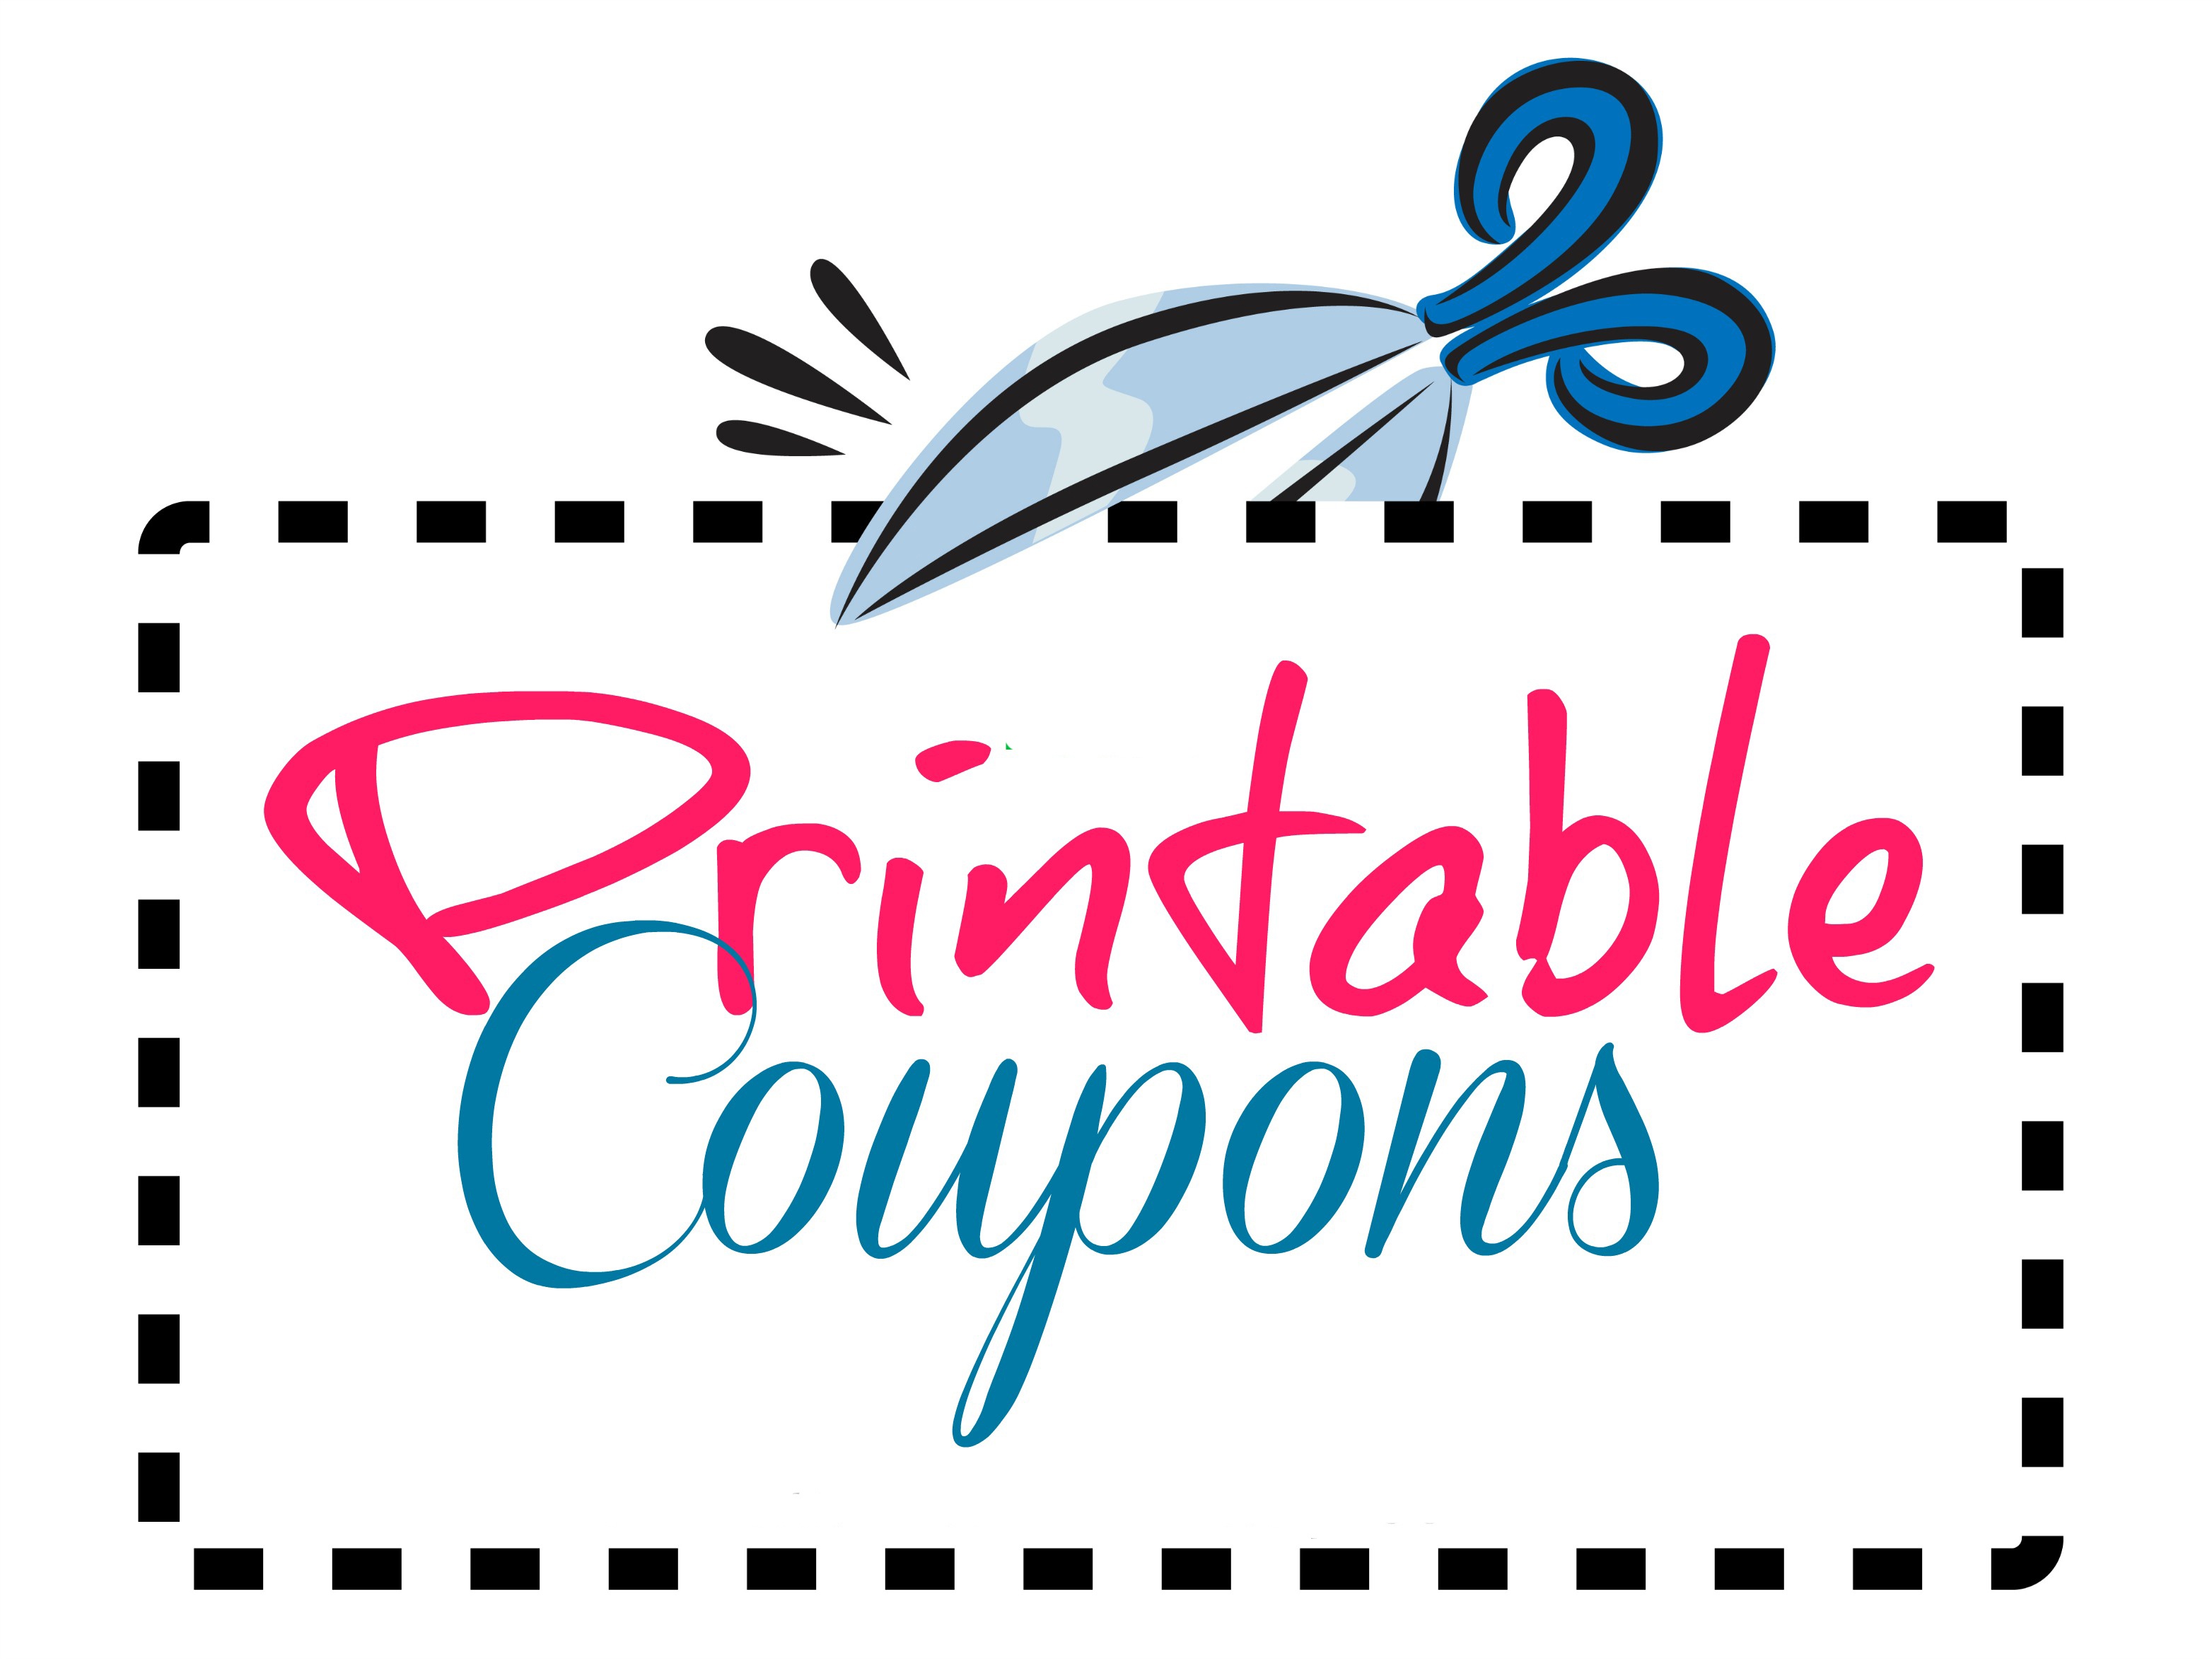 Free Printable Coupons - What And Where | Two Broke Sisters - Free Printable Similac Coupons Online